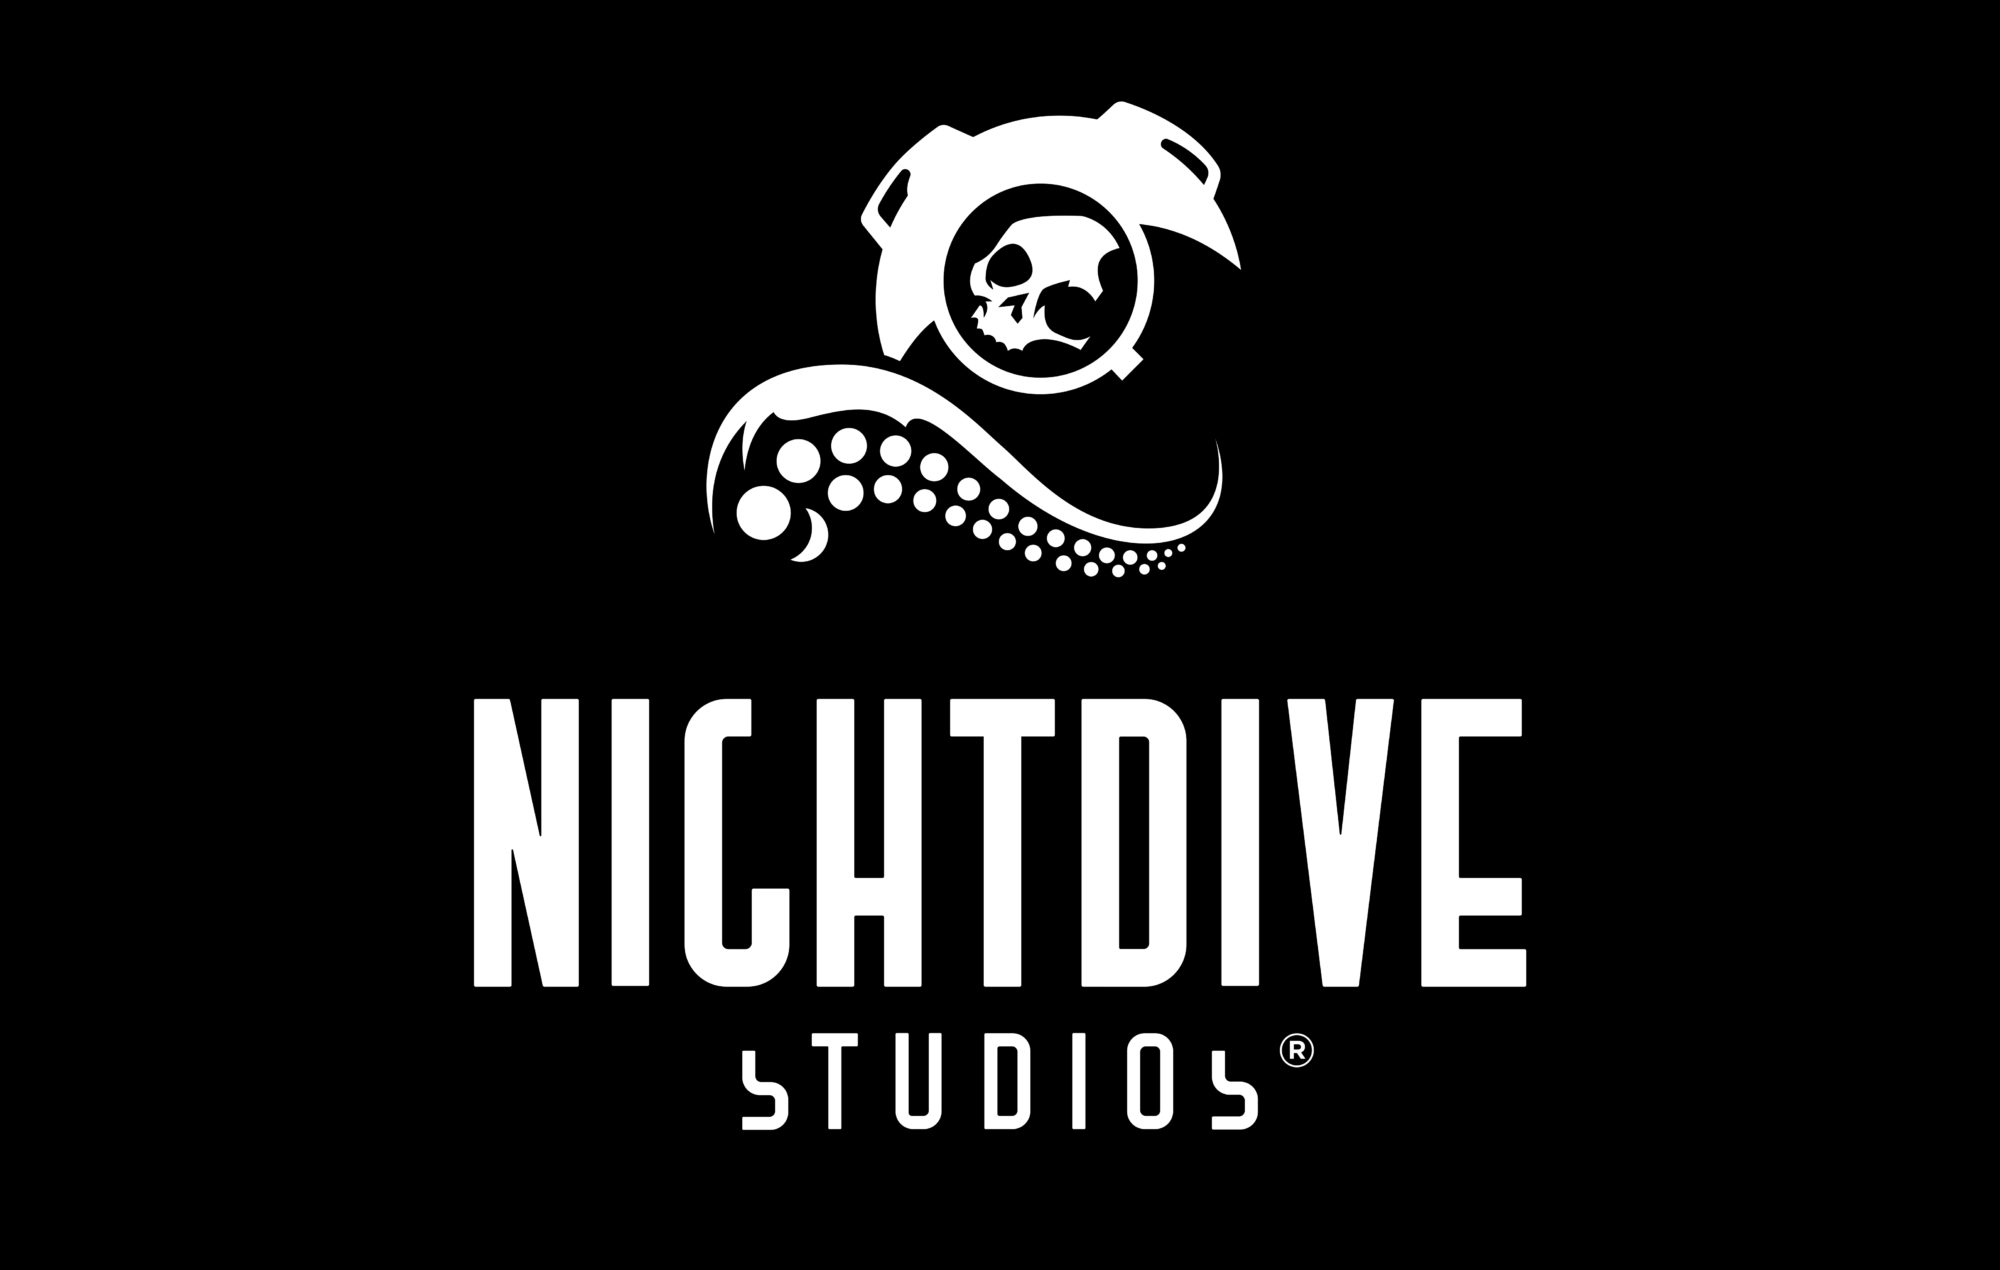 Nightdive Studios teases more remasters of classic 90s shooters